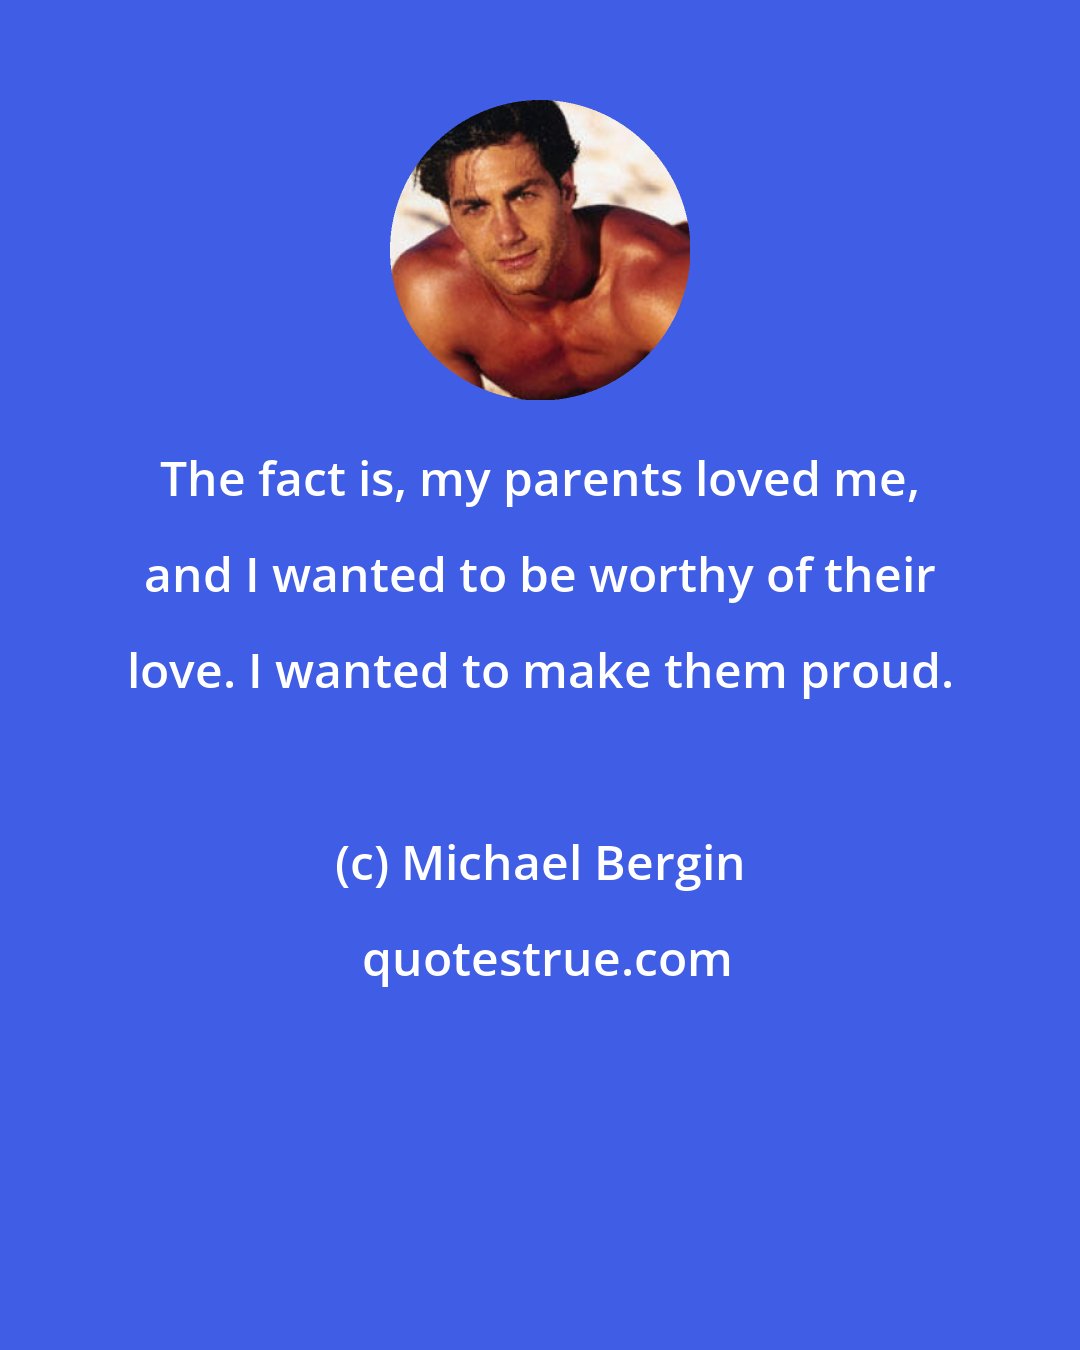 Michael Bergin: The fact is, my parents loved me, and I wanted to be worthy of their love. I wanted to make them proud.